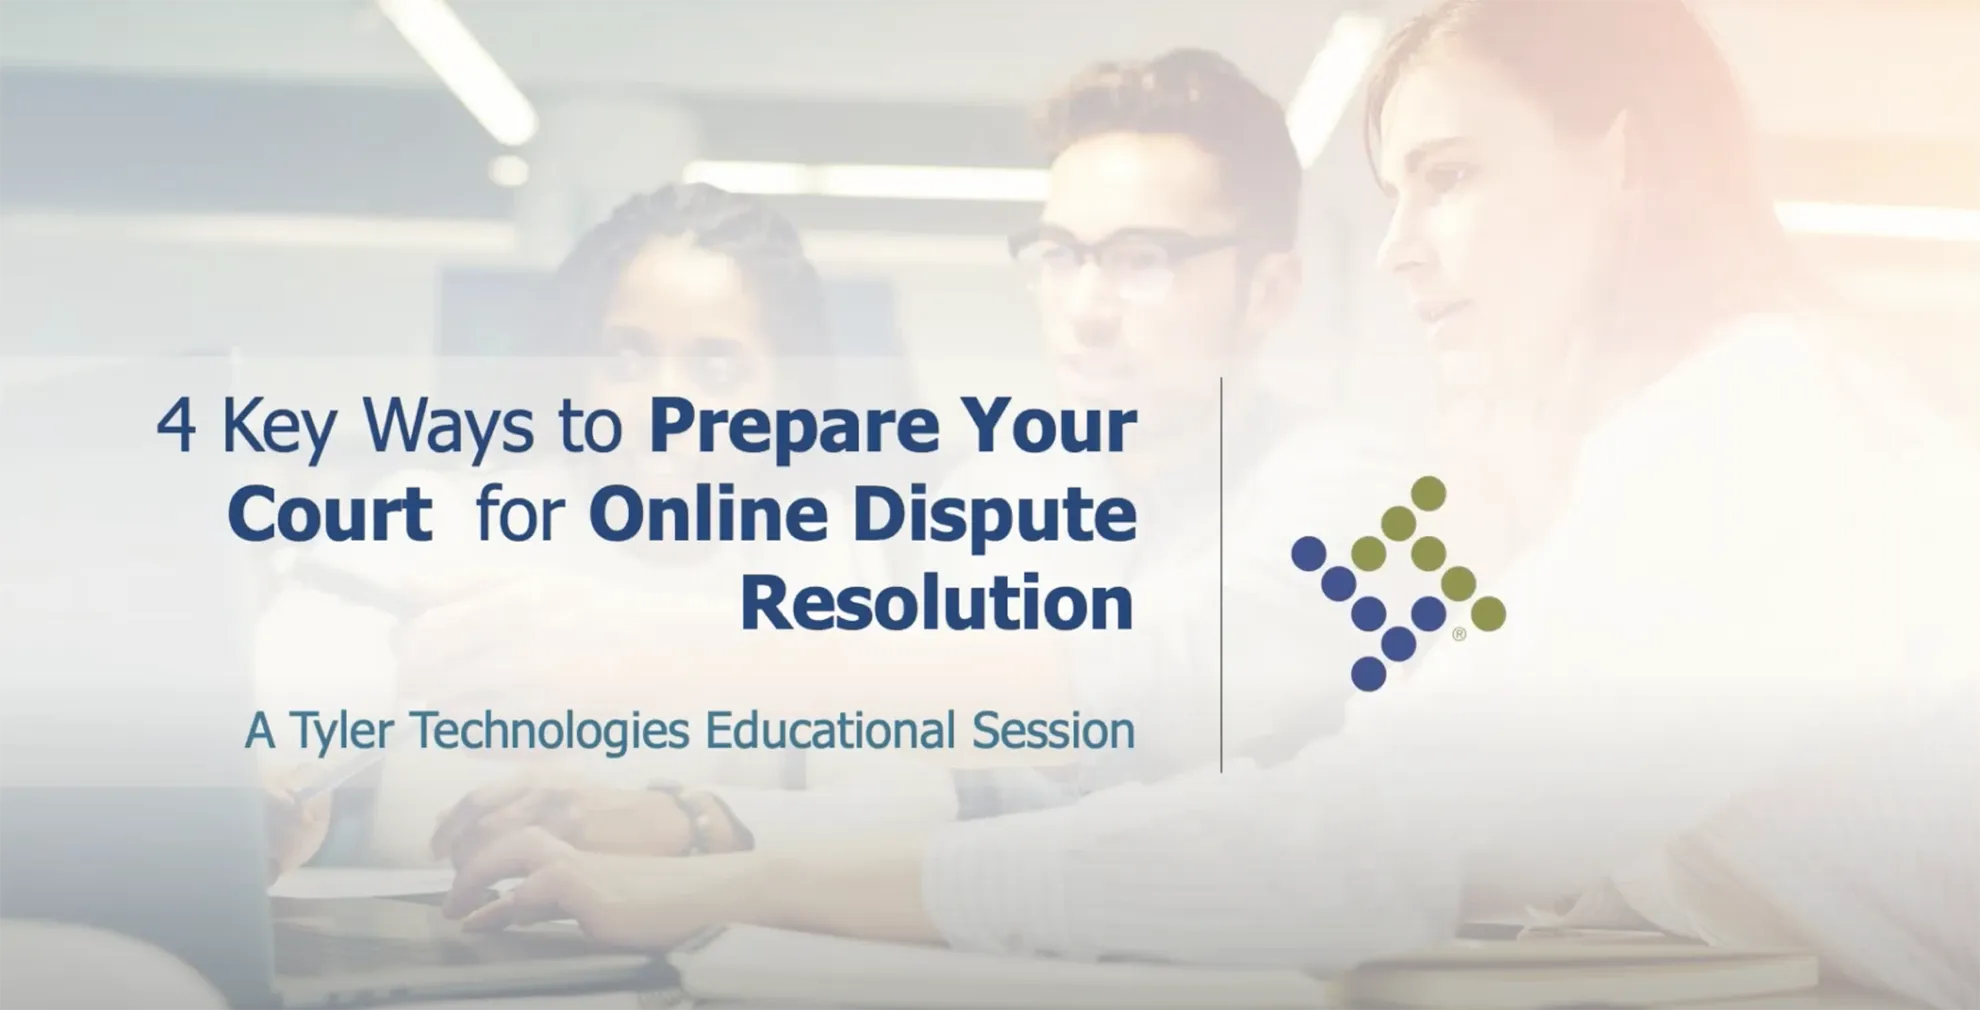 Four Key Ways to Prepare Your Court for Online Dispute Resolution